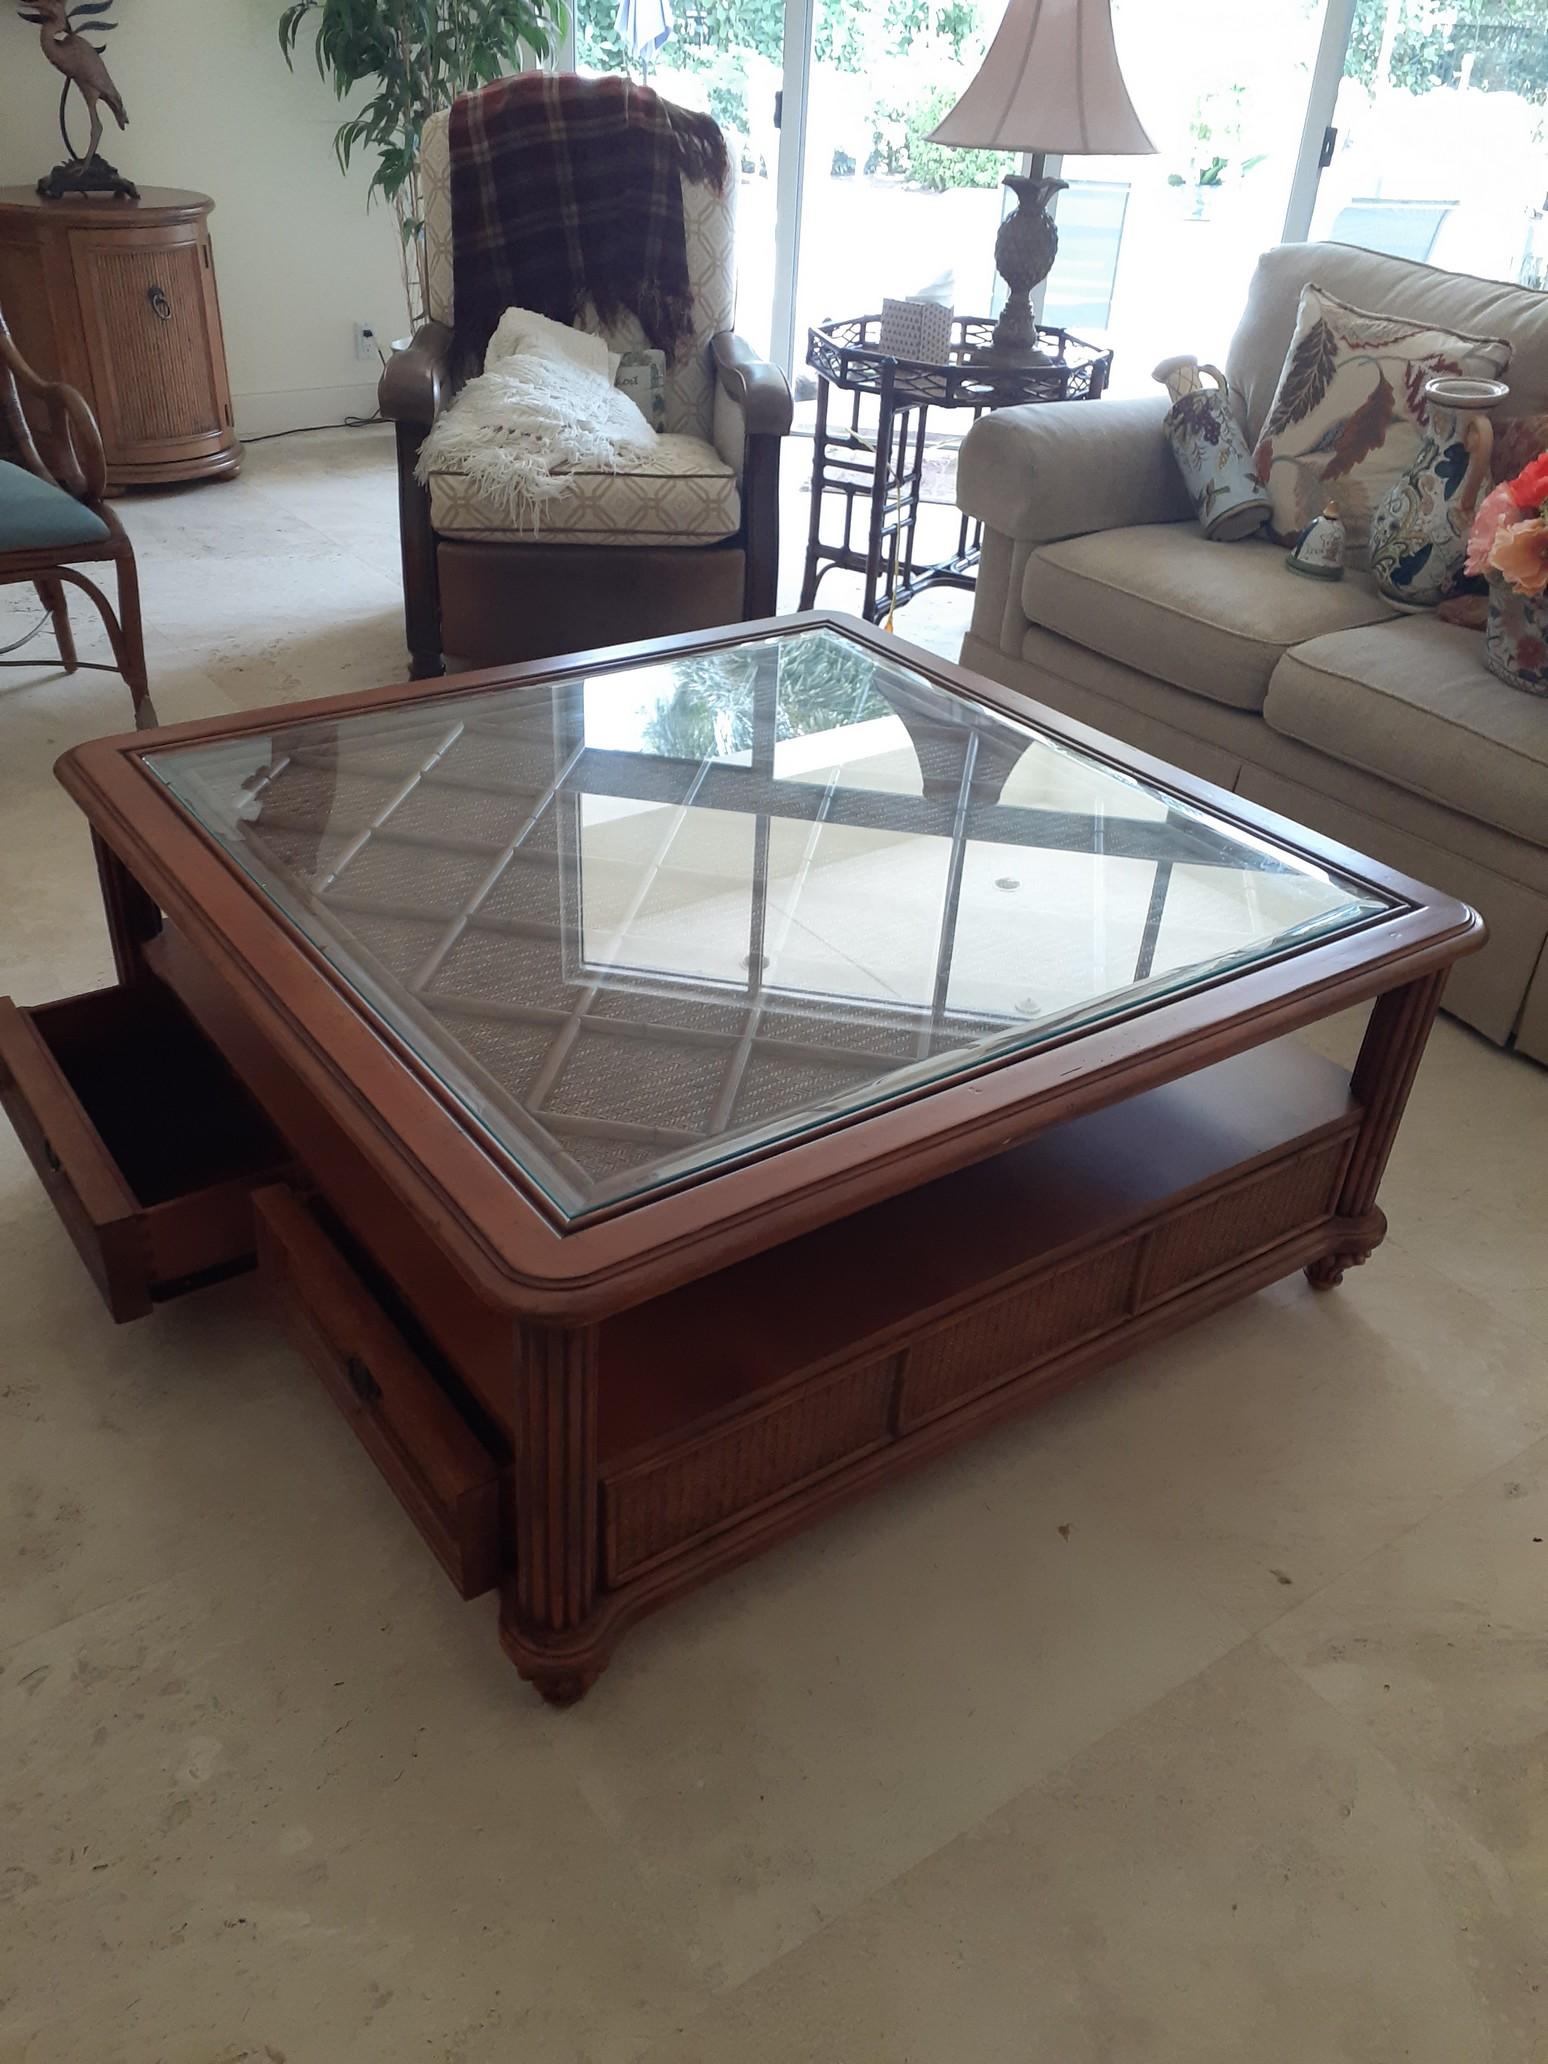 Brown Wicker Coffee Table with glasstop by Newport Beach - 46 x 46 inches